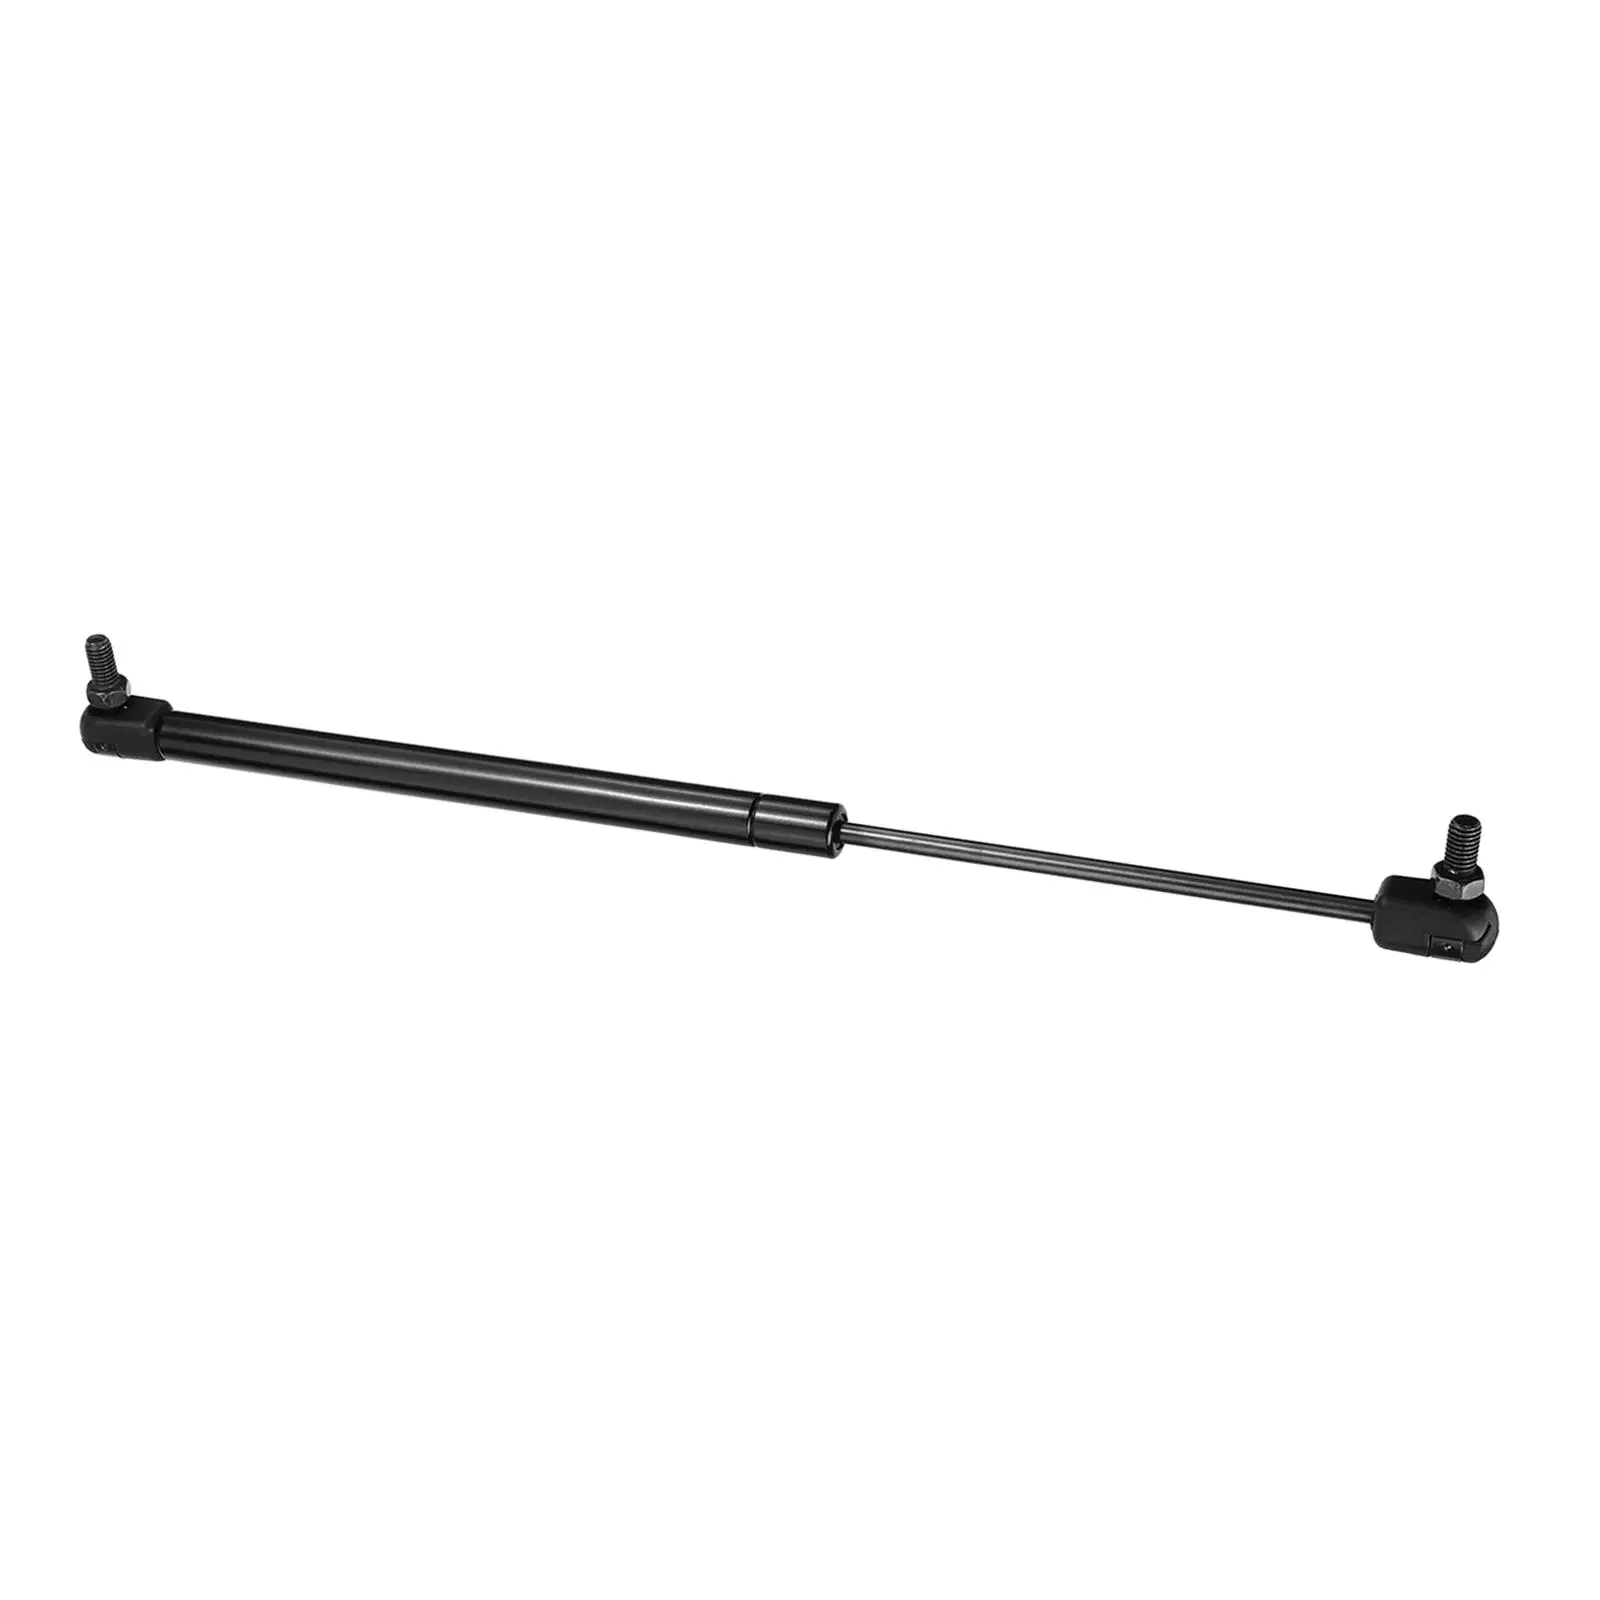 Telescopic Gas Locker Spring Strut 110N Hgi4694347 Arm Shock Lift Support Lid Stay Fits for Caravan Replacement Accessories